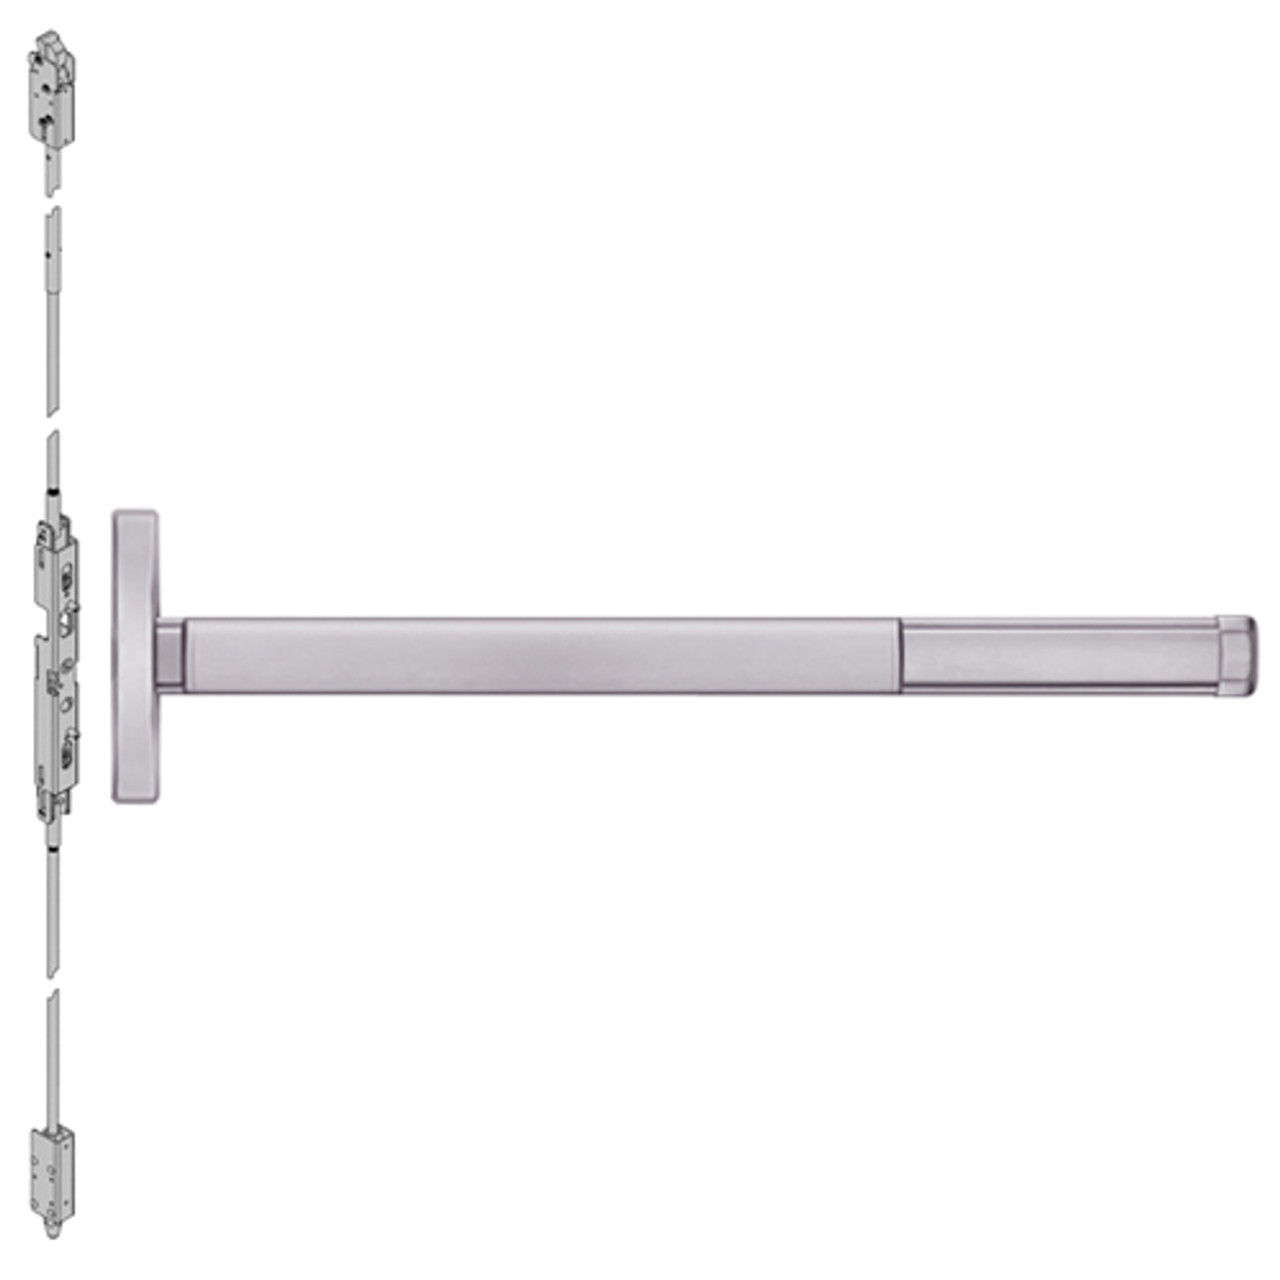 2603LBR-630-36 PHI 2600 Series Non Fire Rated Concealed Vertical Rod Exit Device Prepped for Key Retracts Latchbolt with Less Bottom Rod in Satin Stainless Steel Finish